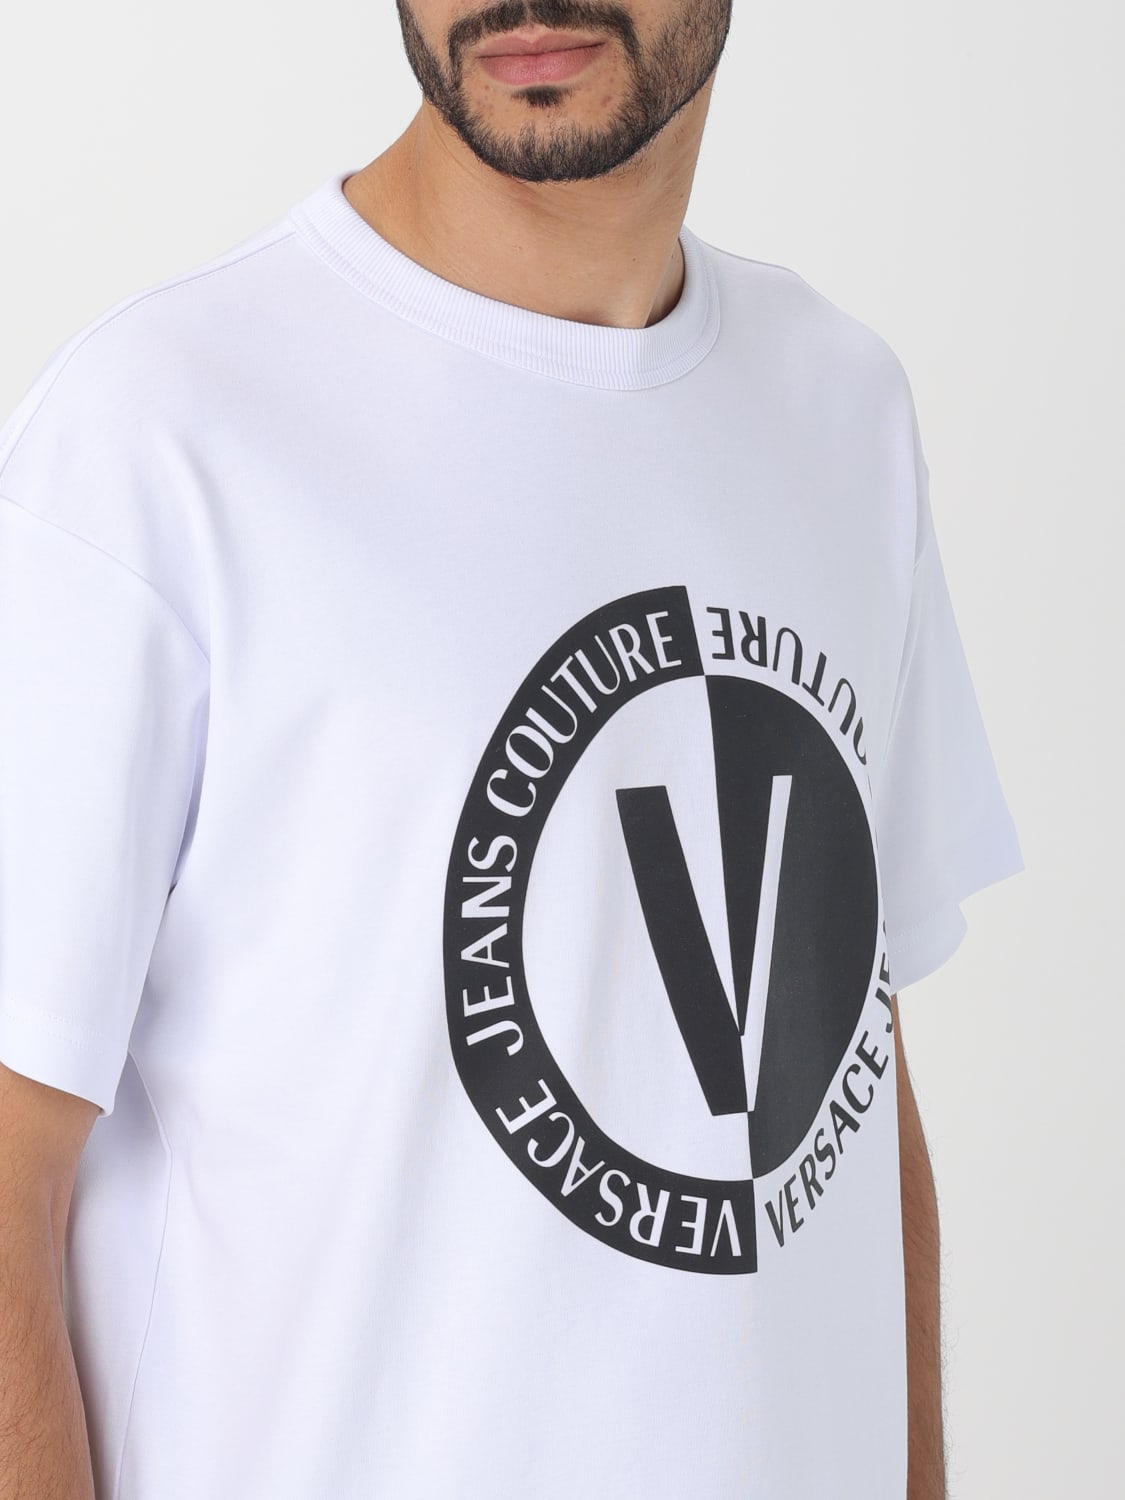 Versace Jeans Couture Outlet: T-shirt with V logo print - White  Versace  Jeans Couture t-shirt 74GAHF01CJ00F online at